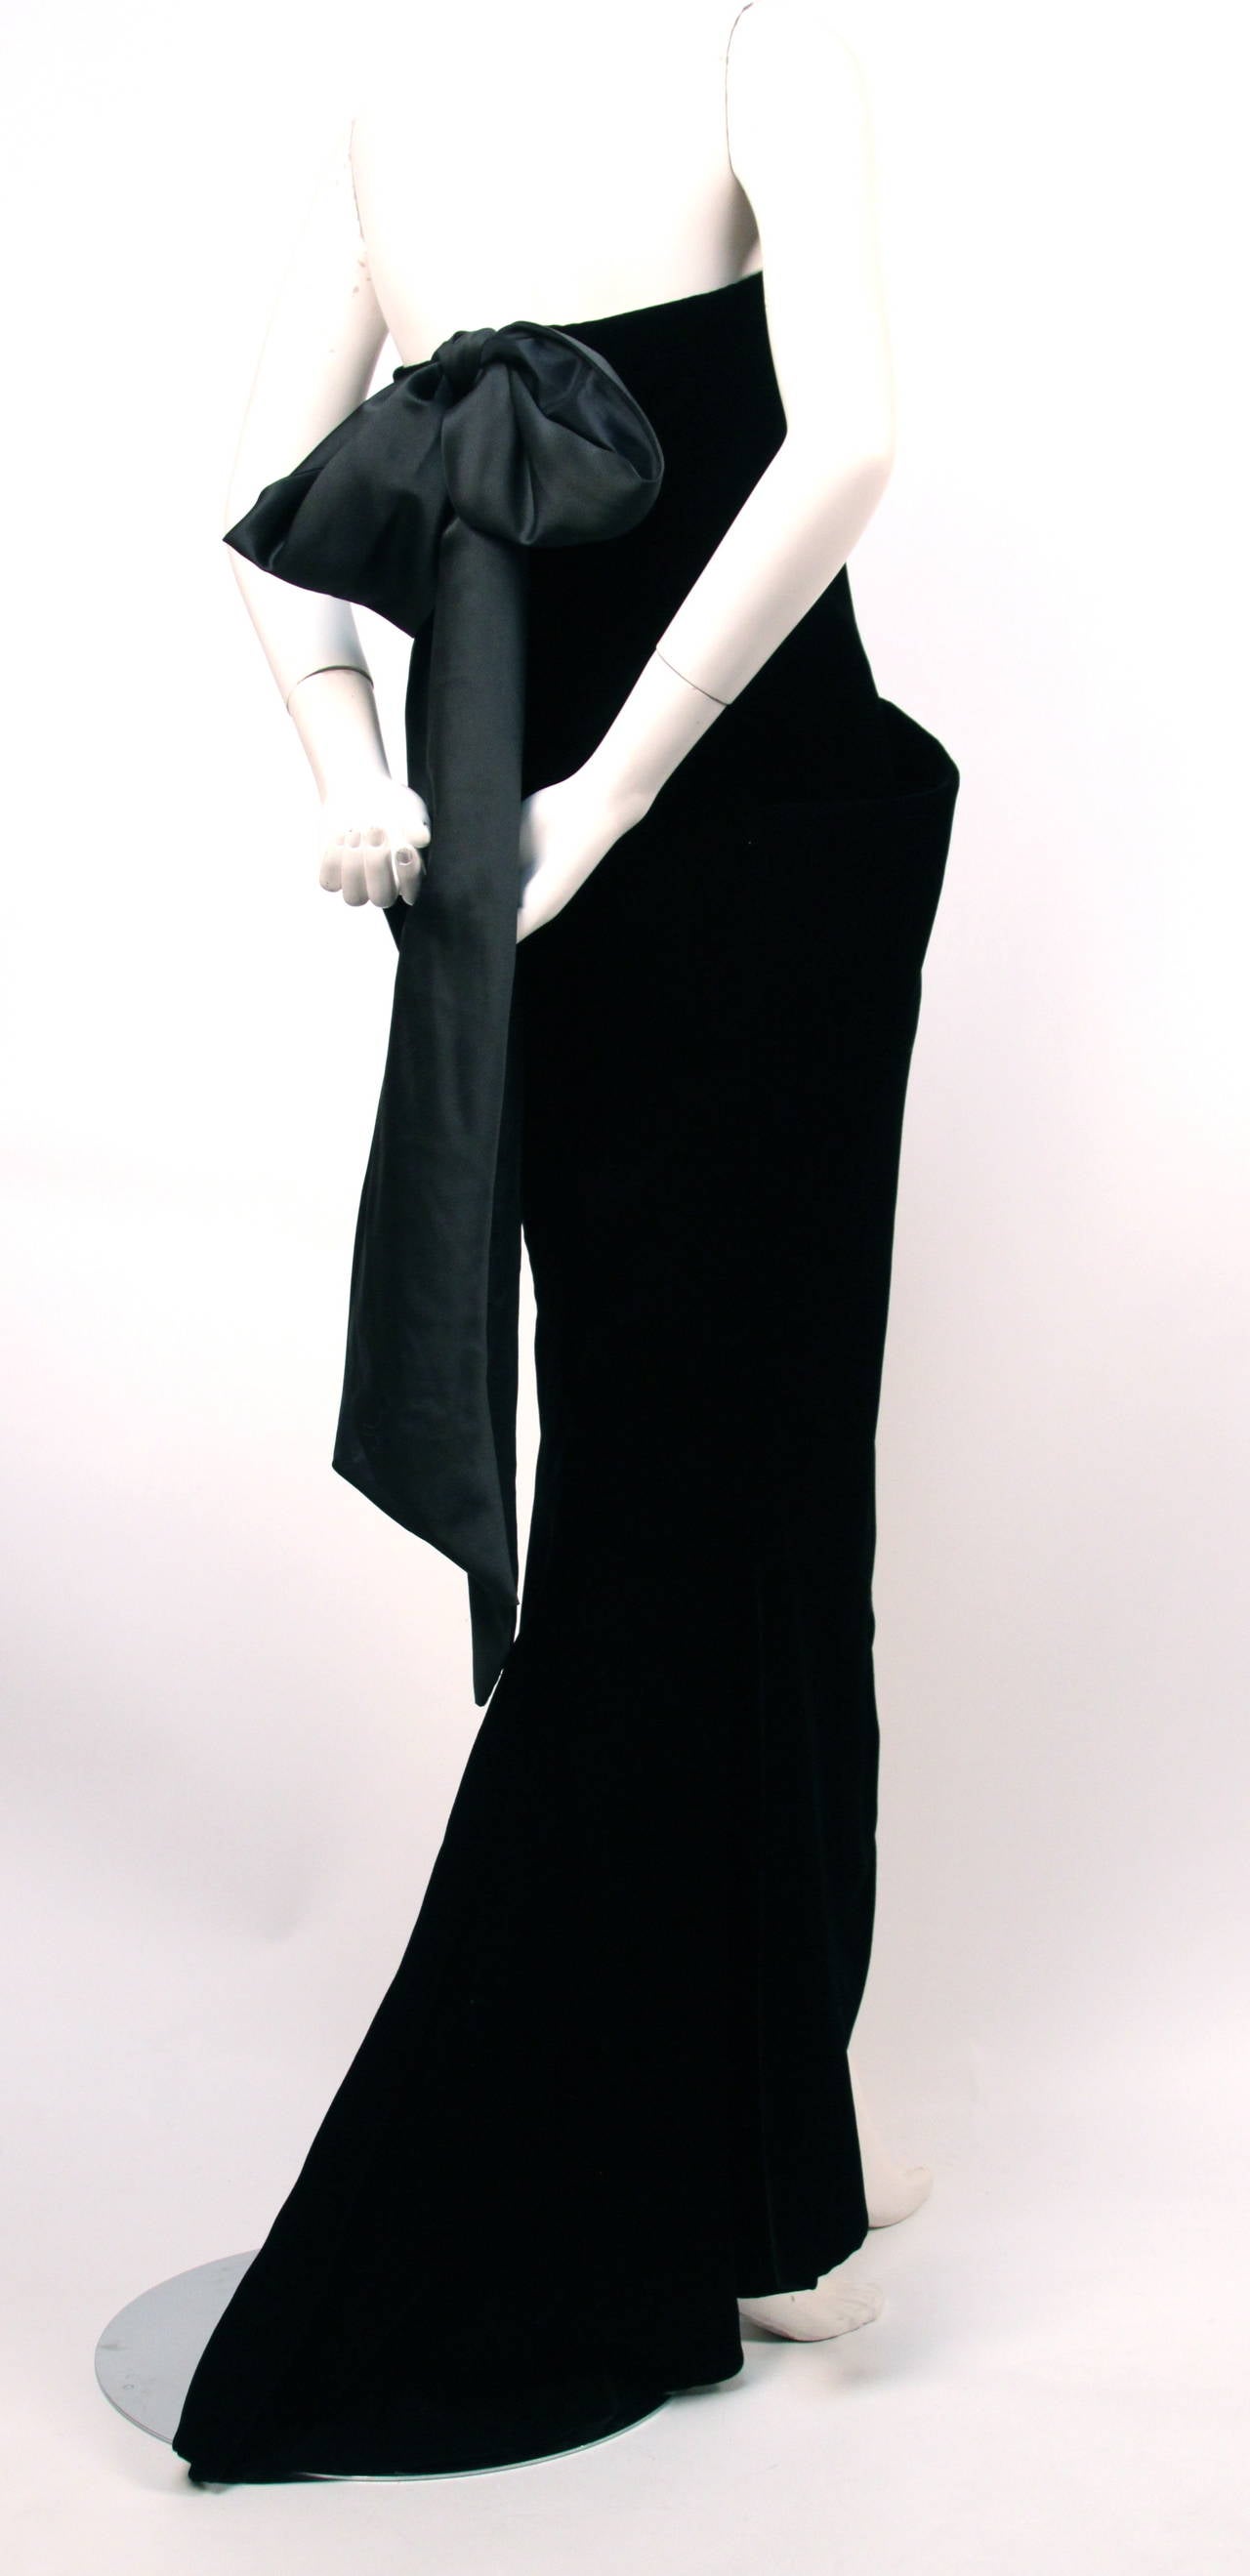 Jet black velvet haute couture gown with large wrap around pockets, high front slit and satin bow at back from Christian Dior designed by Marc Bohan dating to the fall of 1986. Best fits a US size 4. Approximate measurements: bust 32-33